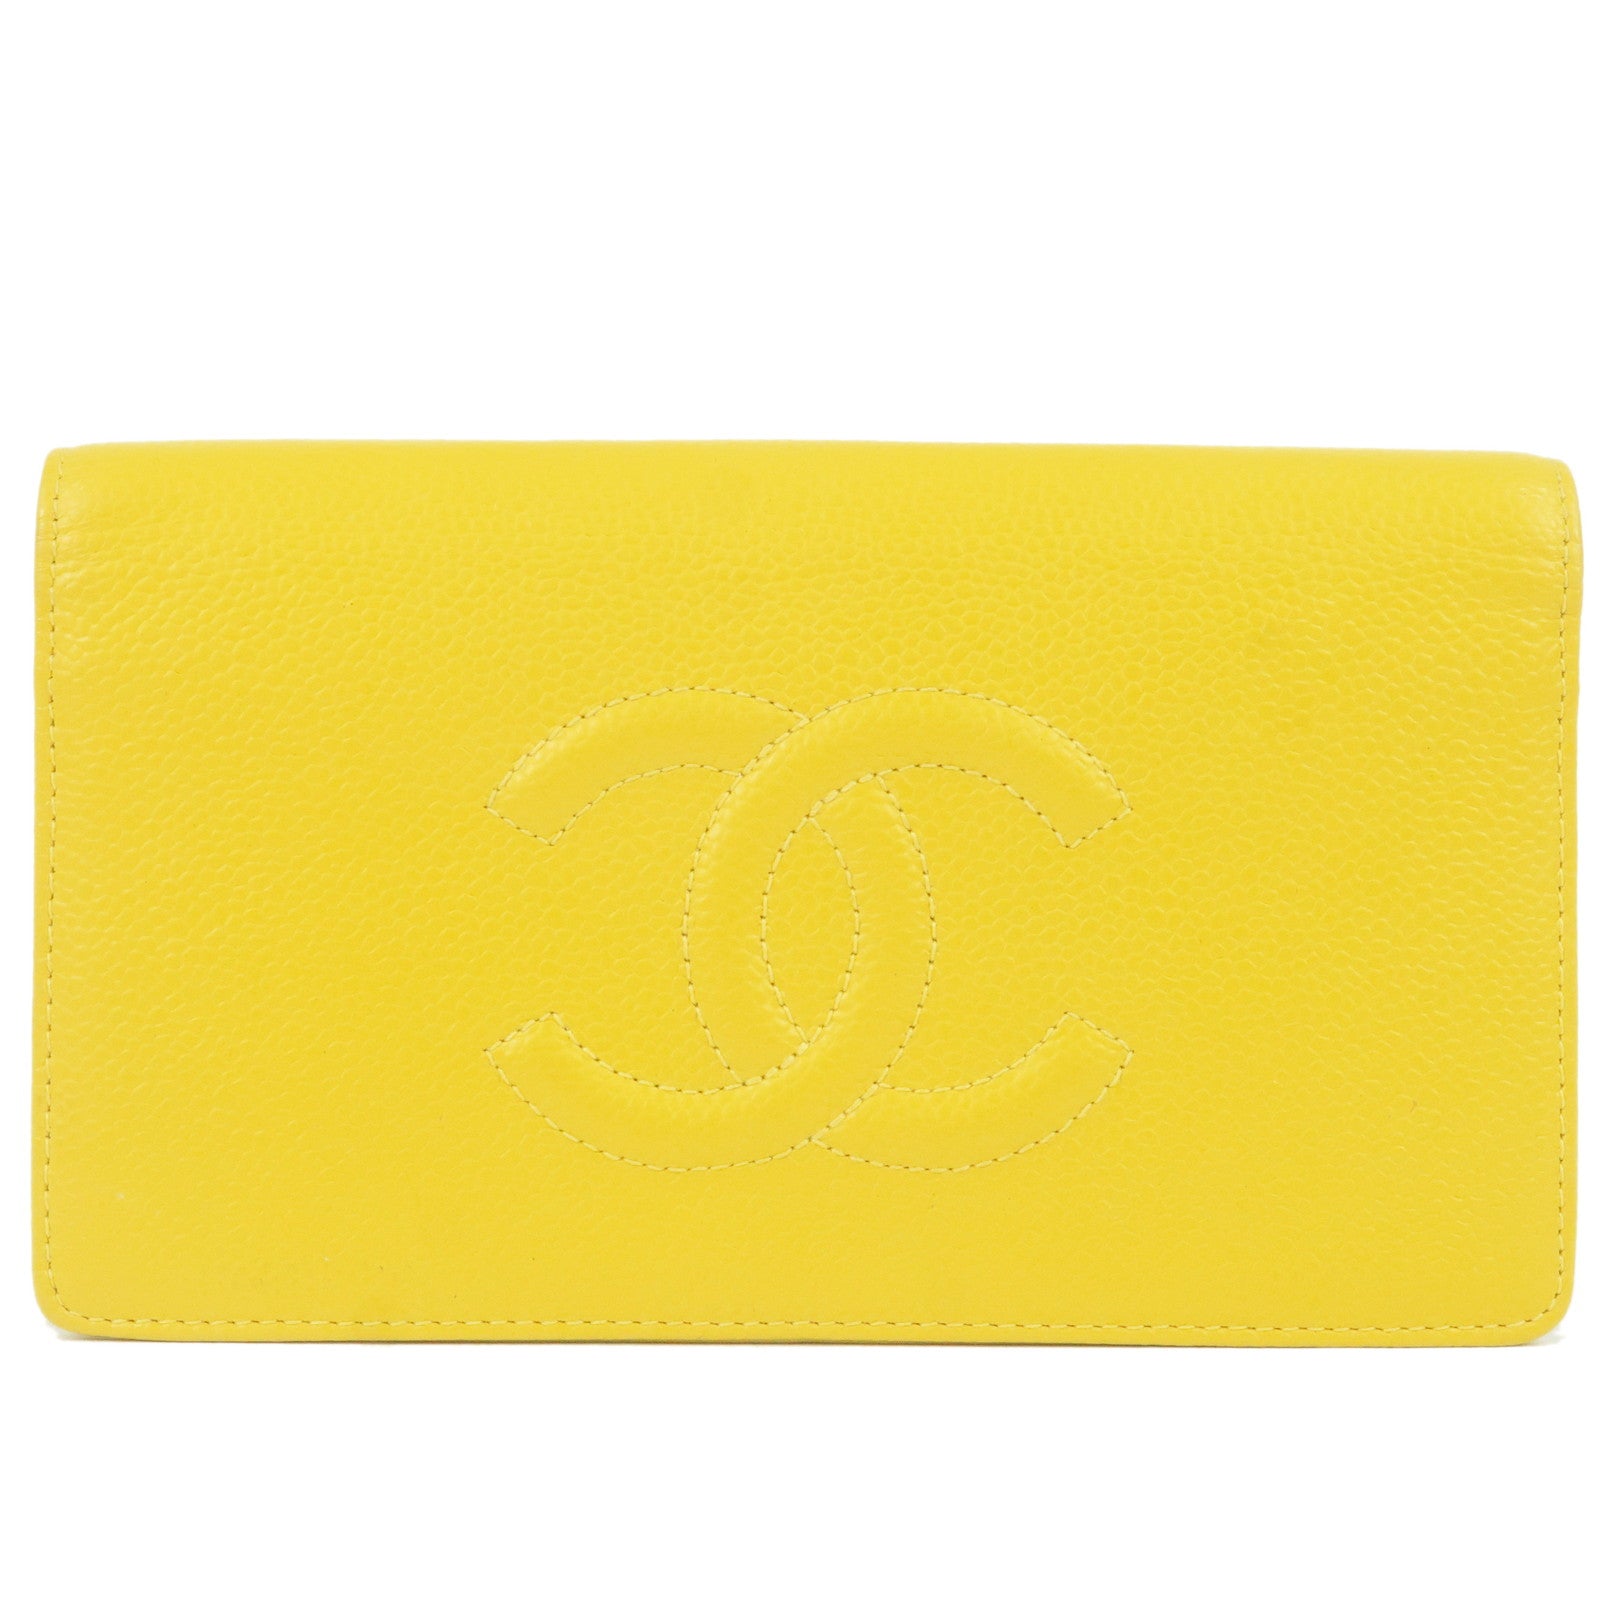 The Chanel key pouch can be used as a wallet too.